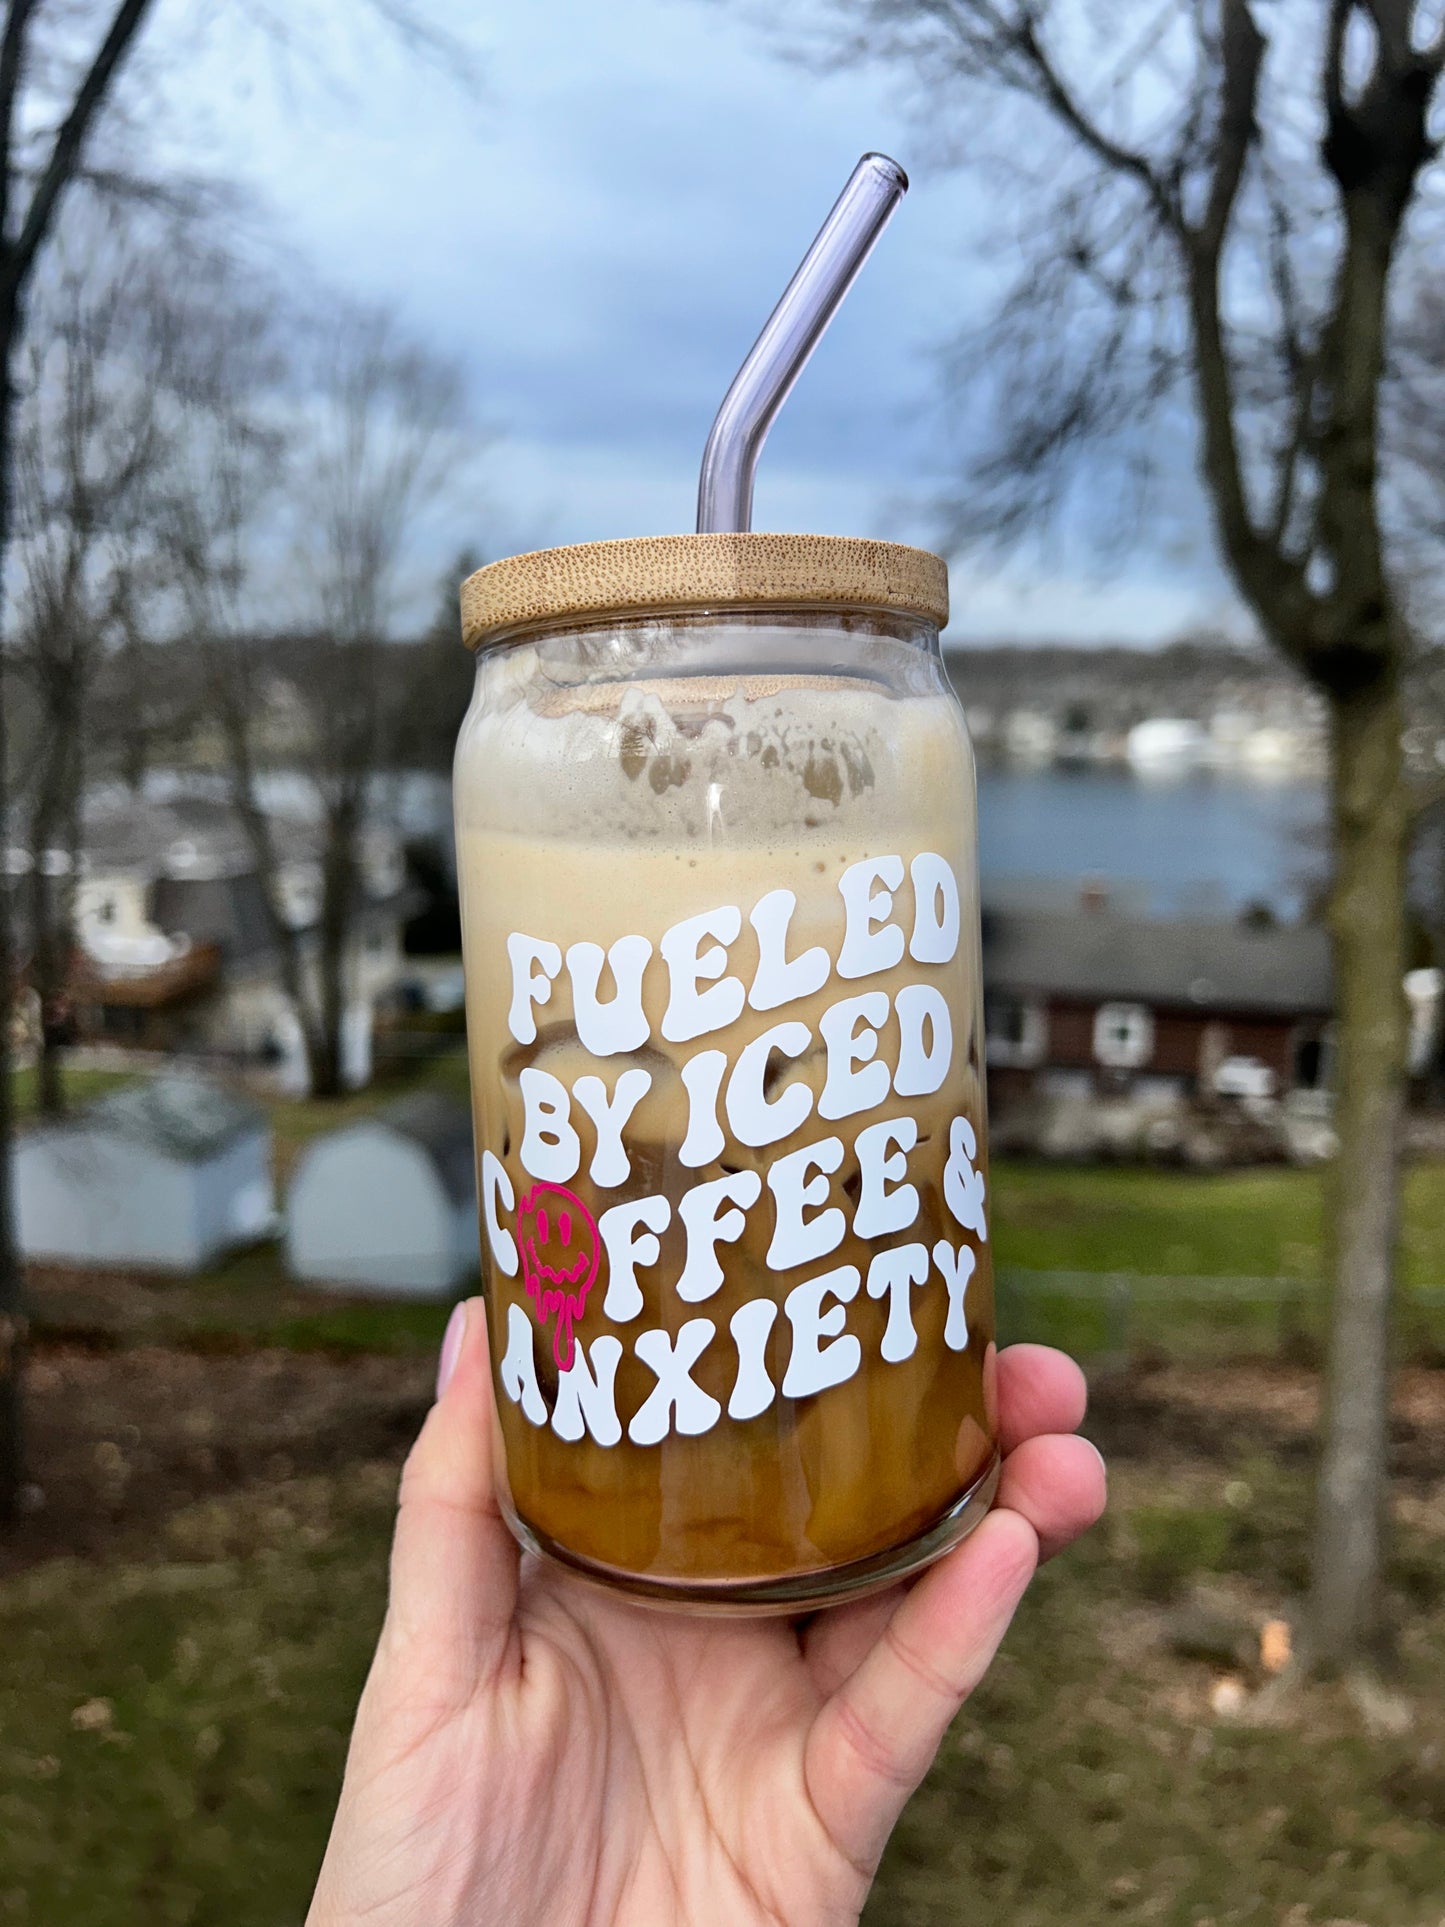 Fueled By Iced Coffee and Anxiety Beer Can Glass